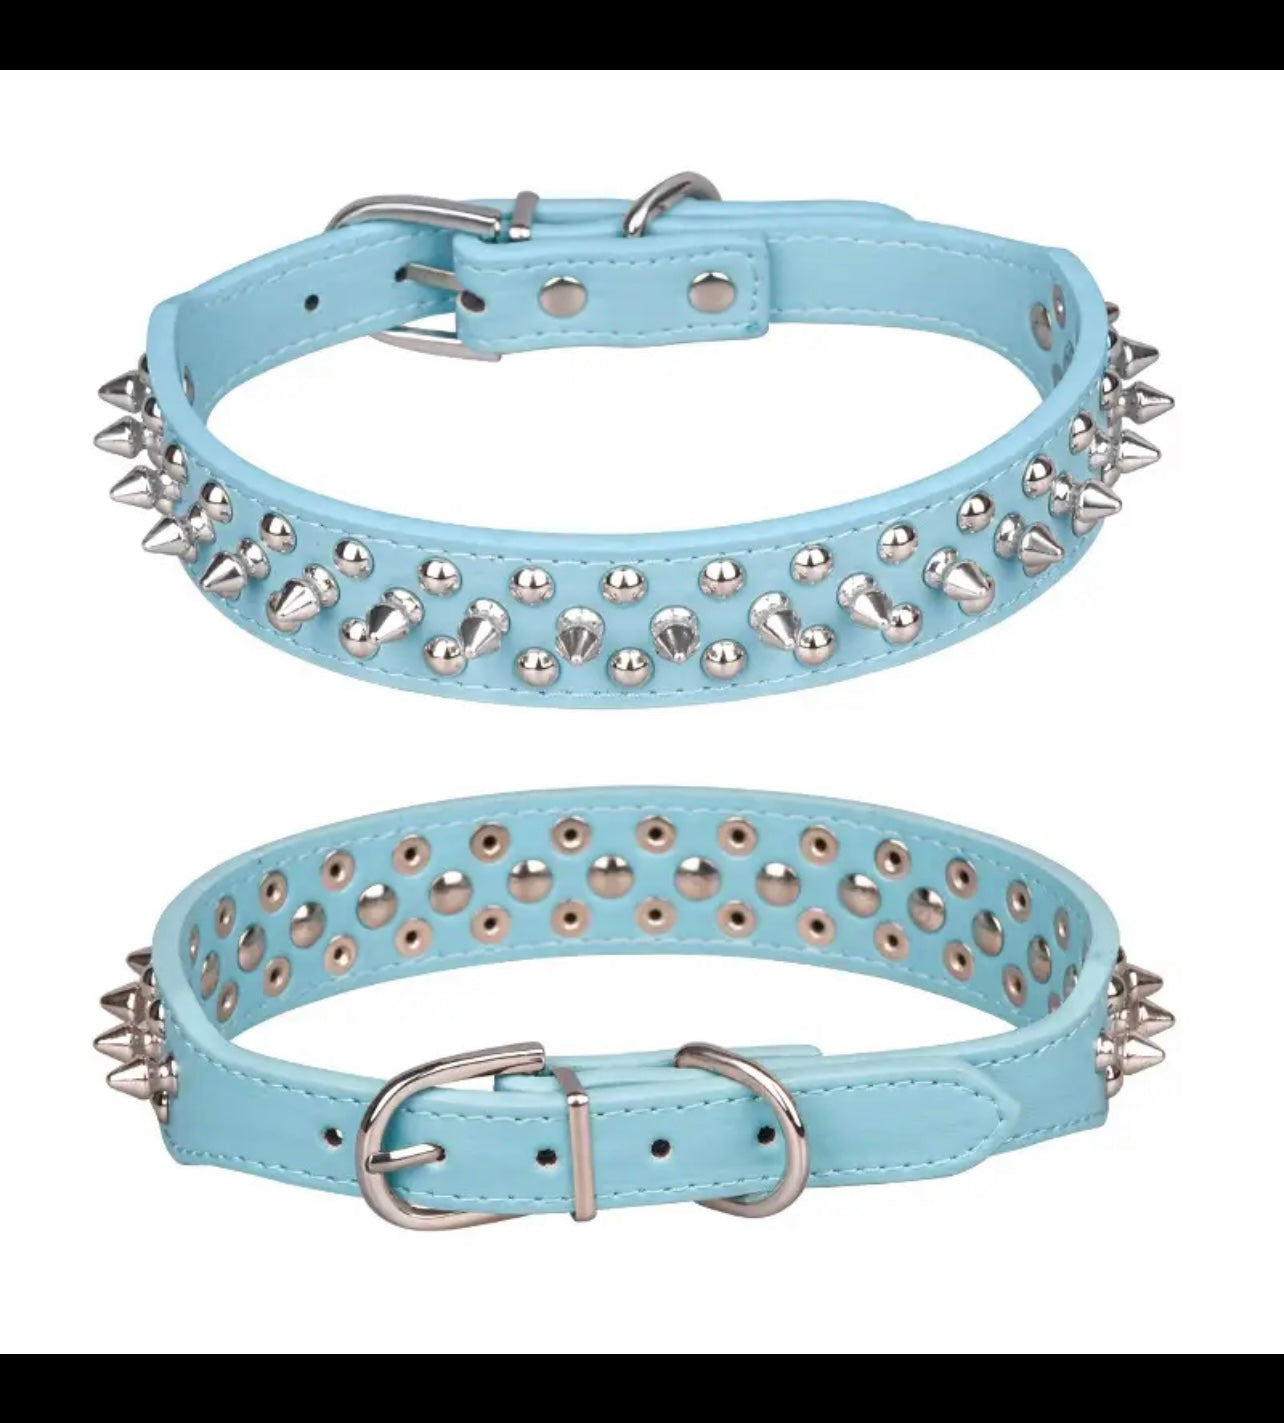 Puppy spiked leather collar